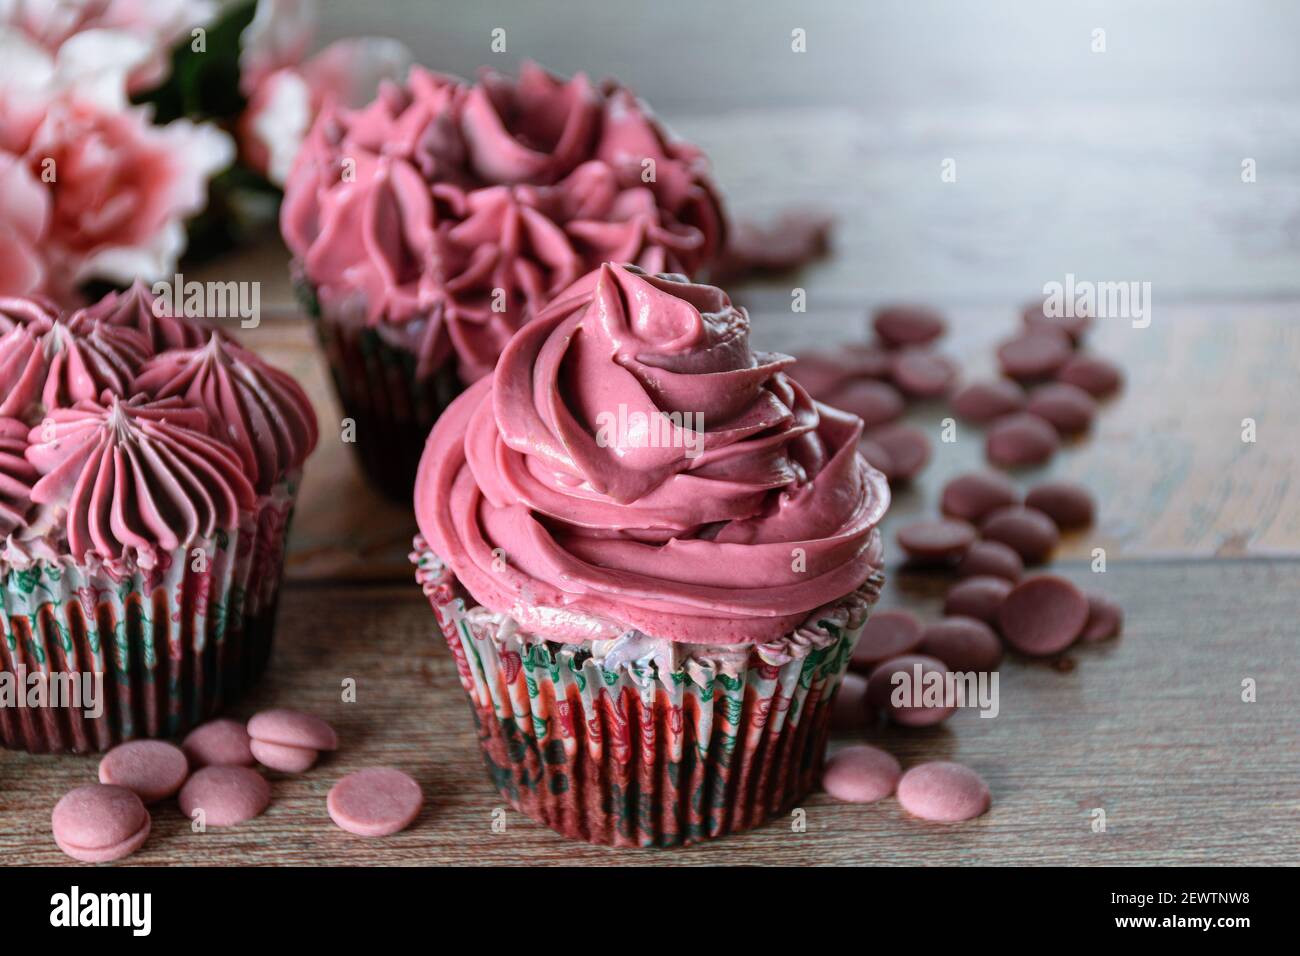 Closeup of three chocolate cupcakes with pink butter cream. Next to Ruby chocolate callets (with copy space). Stock Photo